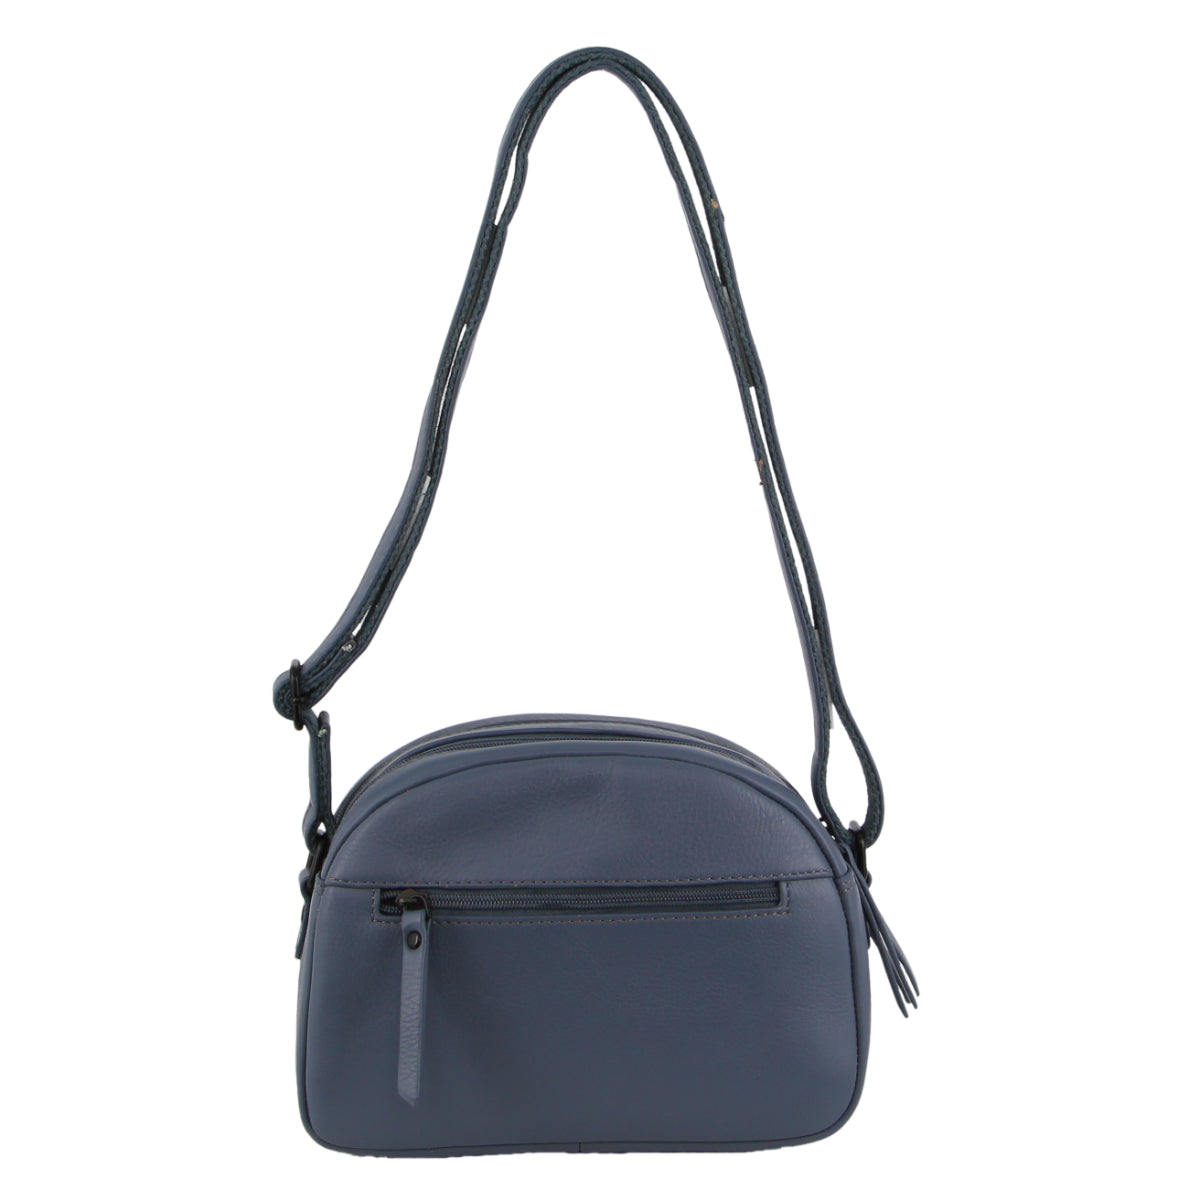 Milleni - NL3869 Small rounded leather sidebag - Teal-1